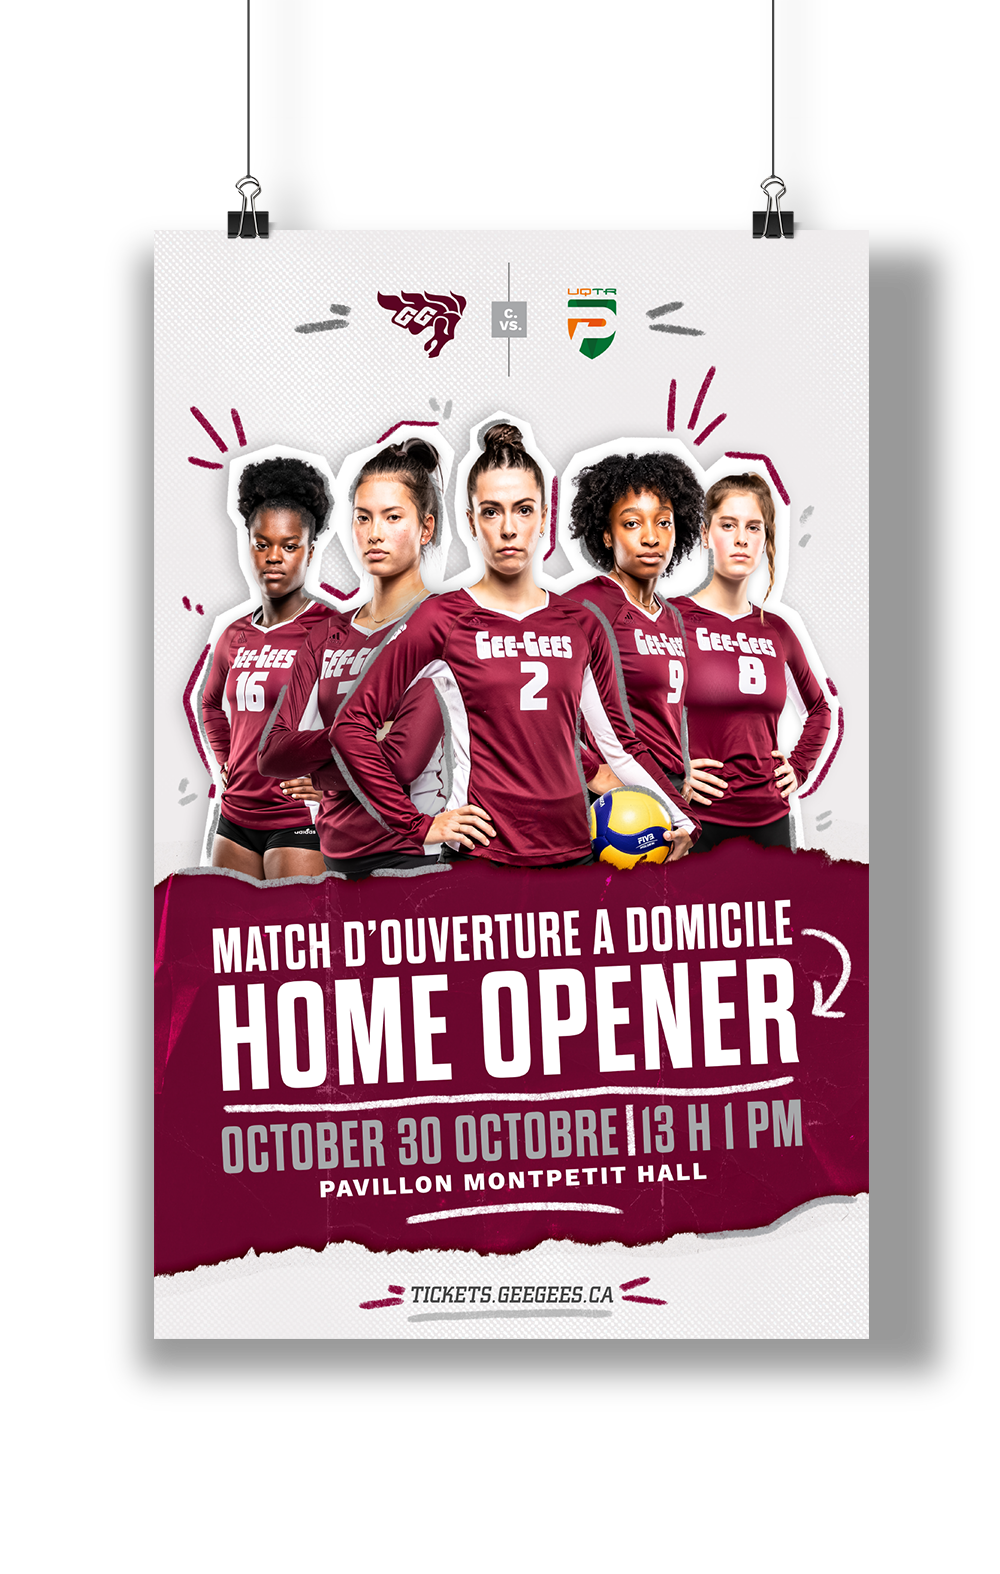 Poster promoting volleyball game.